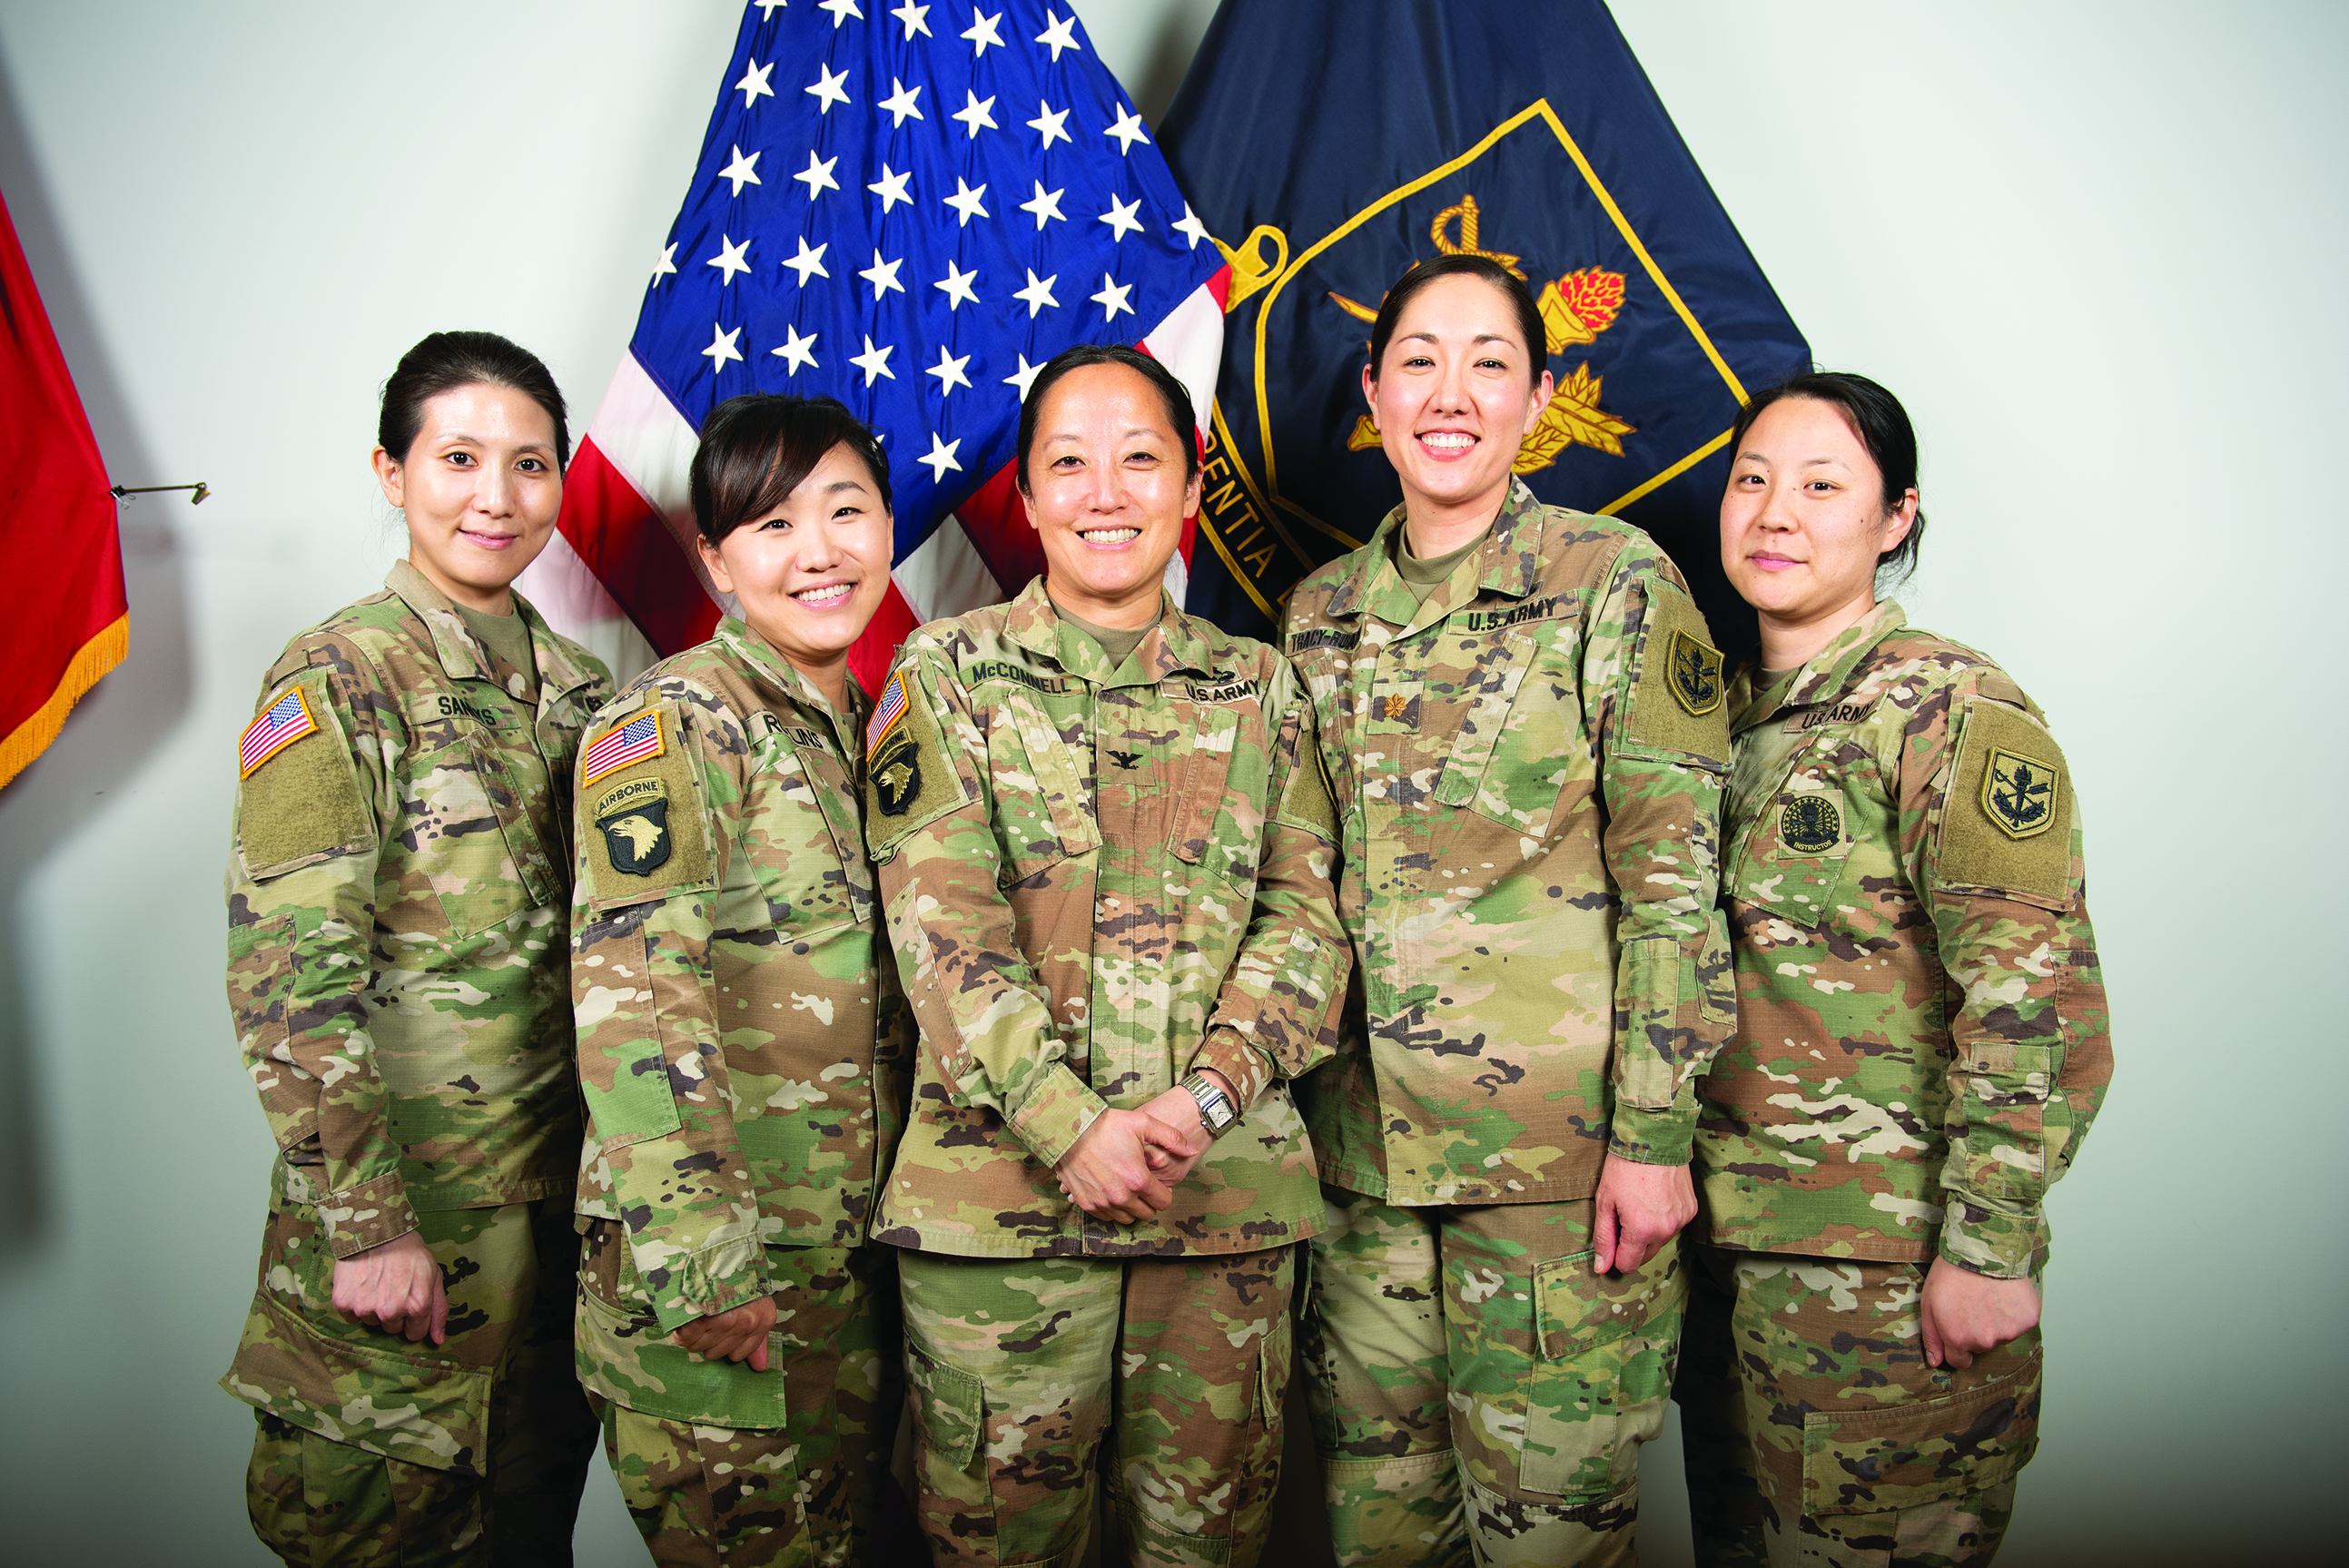 From left to right: MAJ Pearl Sandys, LTC Hana
        Rollins, COL Susan McConnell, MAJ Sara Tracy, and
        SSG Dana Song. (Credit: Jason Wilkerson/TJAGLCS)